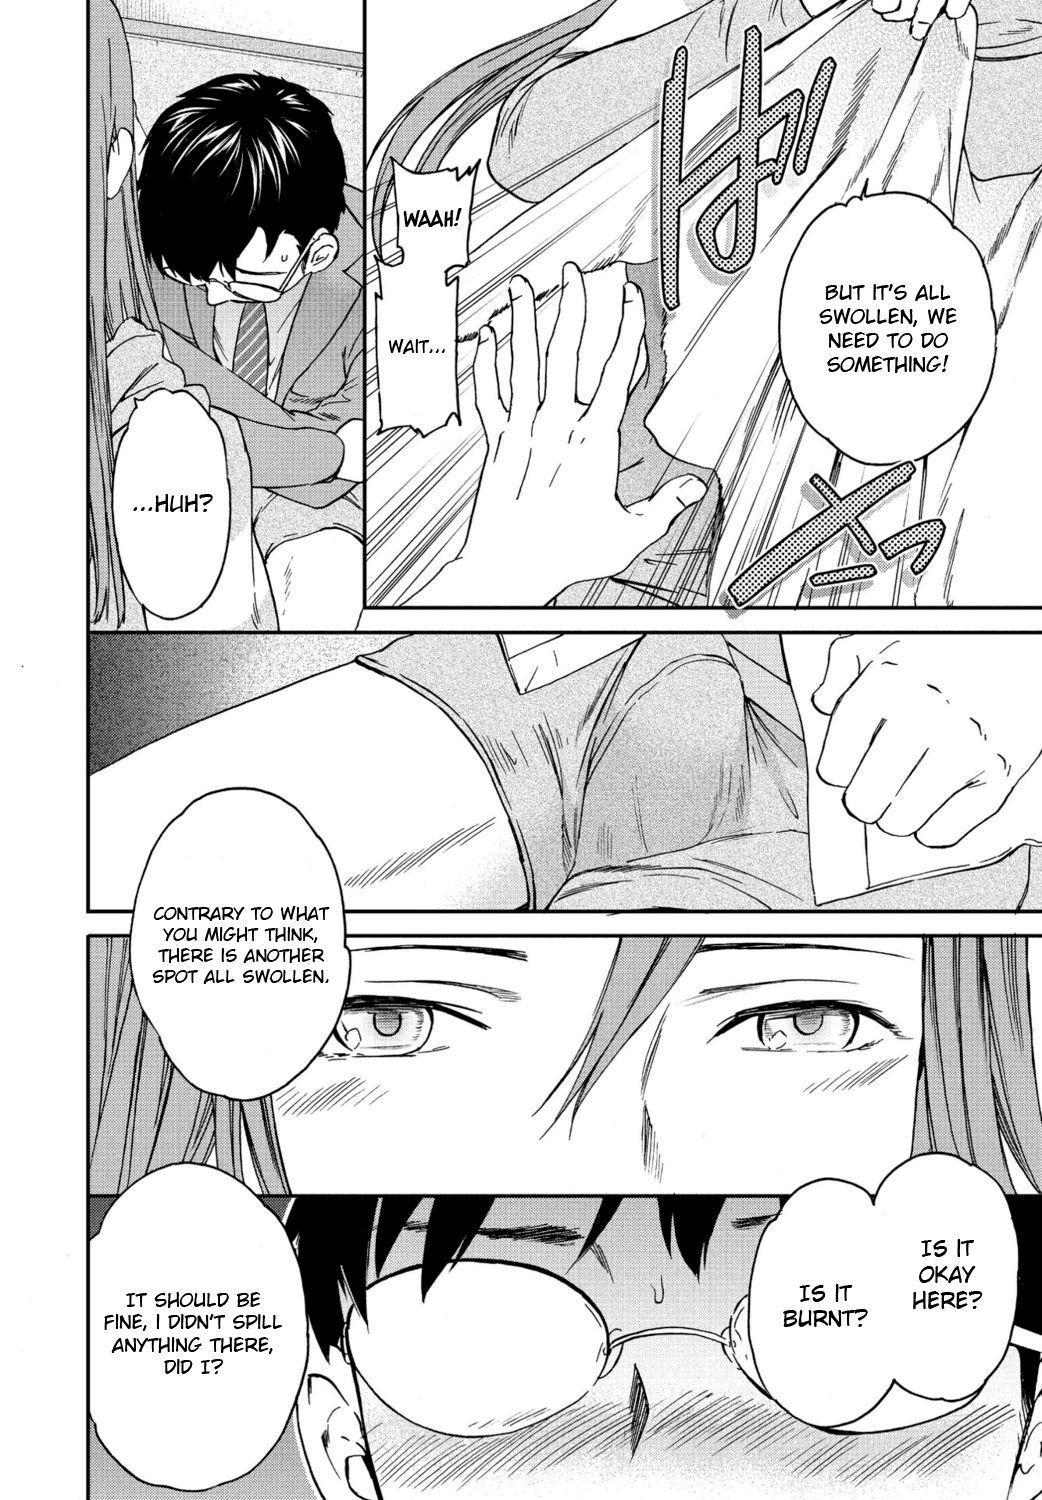 Funny Yuutousei | Model student Jerking Off - Page 12